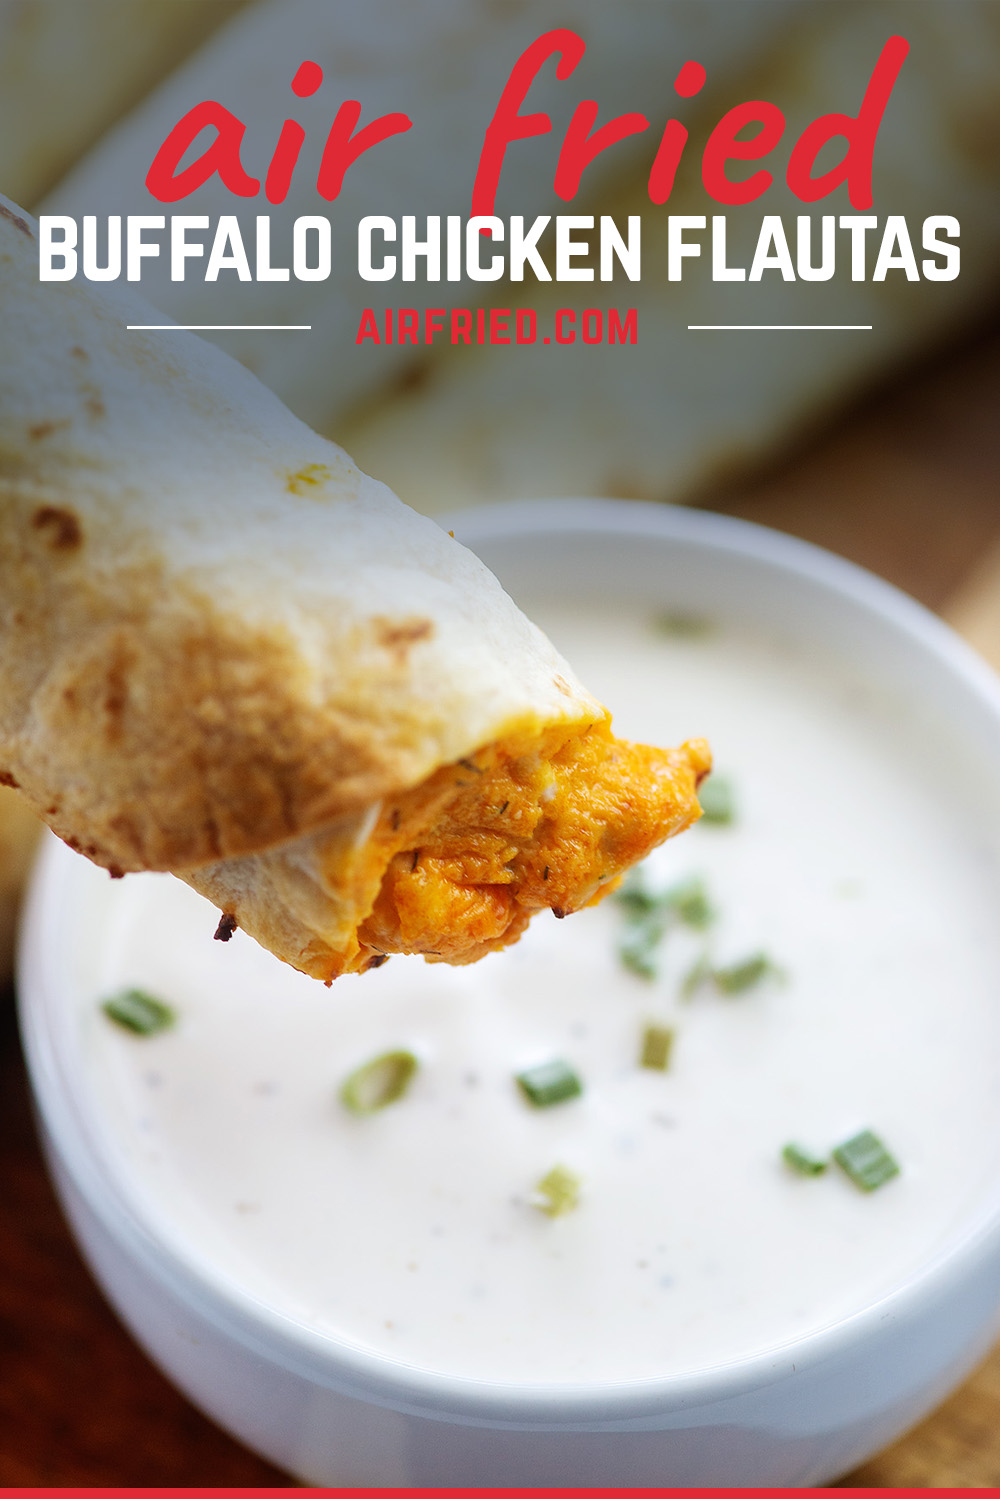 These buffalo chicken flautas are delicious dipped in blue cheese or ranch dressing! #buffalochicken #partyfood #airfried